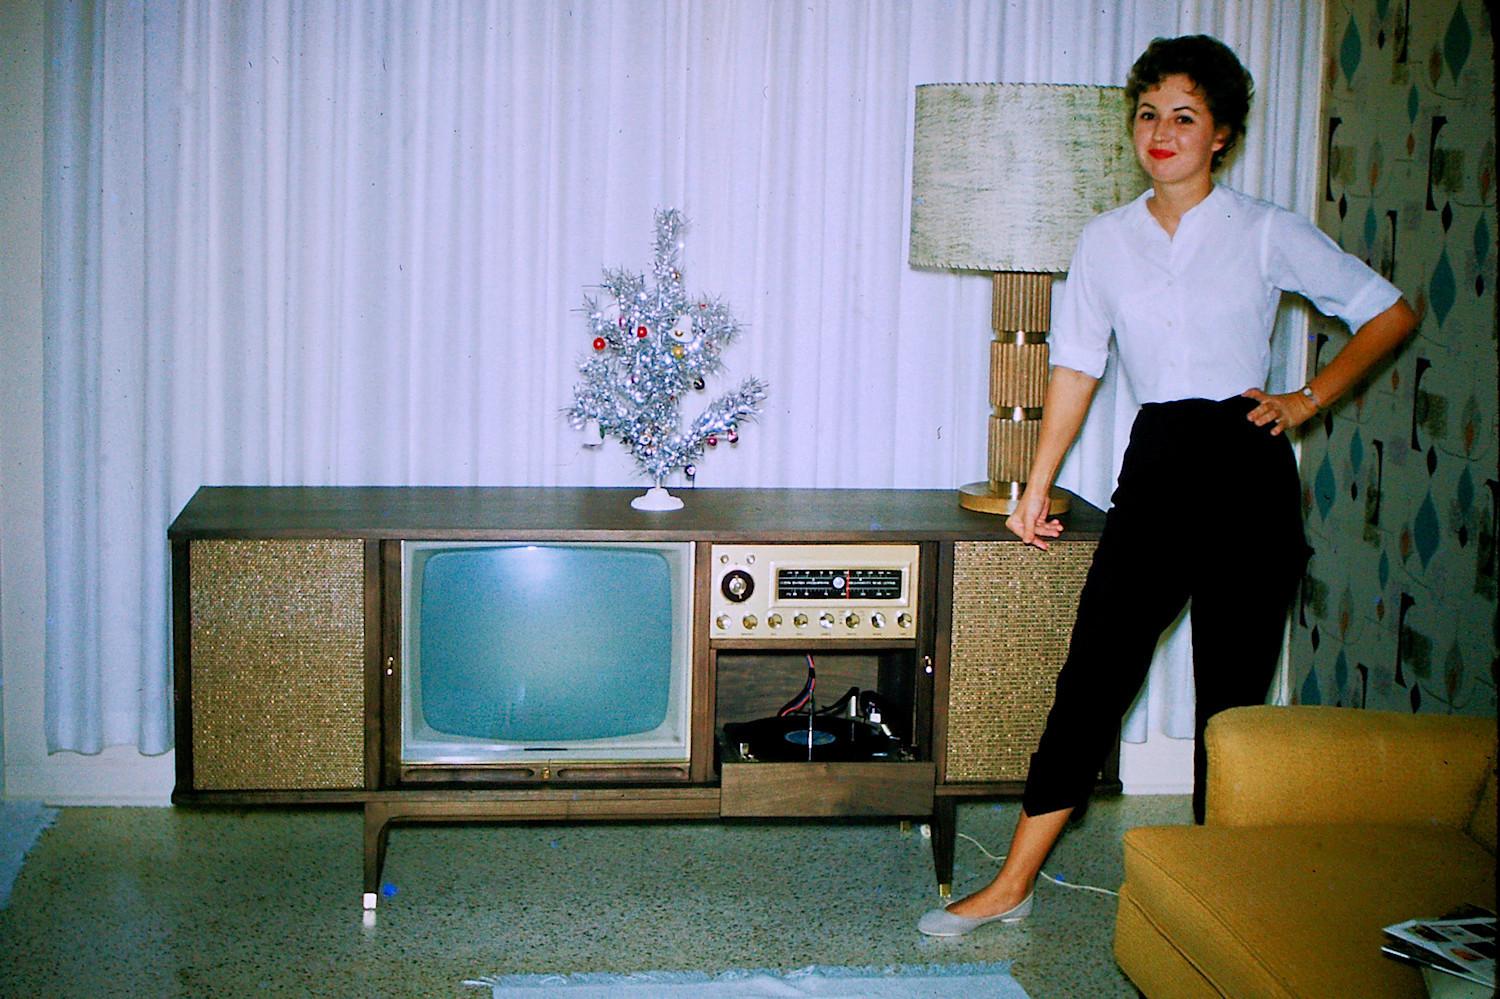 Ticks all the boxes... TV console, aluminum X-mas tree, funky wallpaper, capri pants. Welcome to the early 1960s.jpg